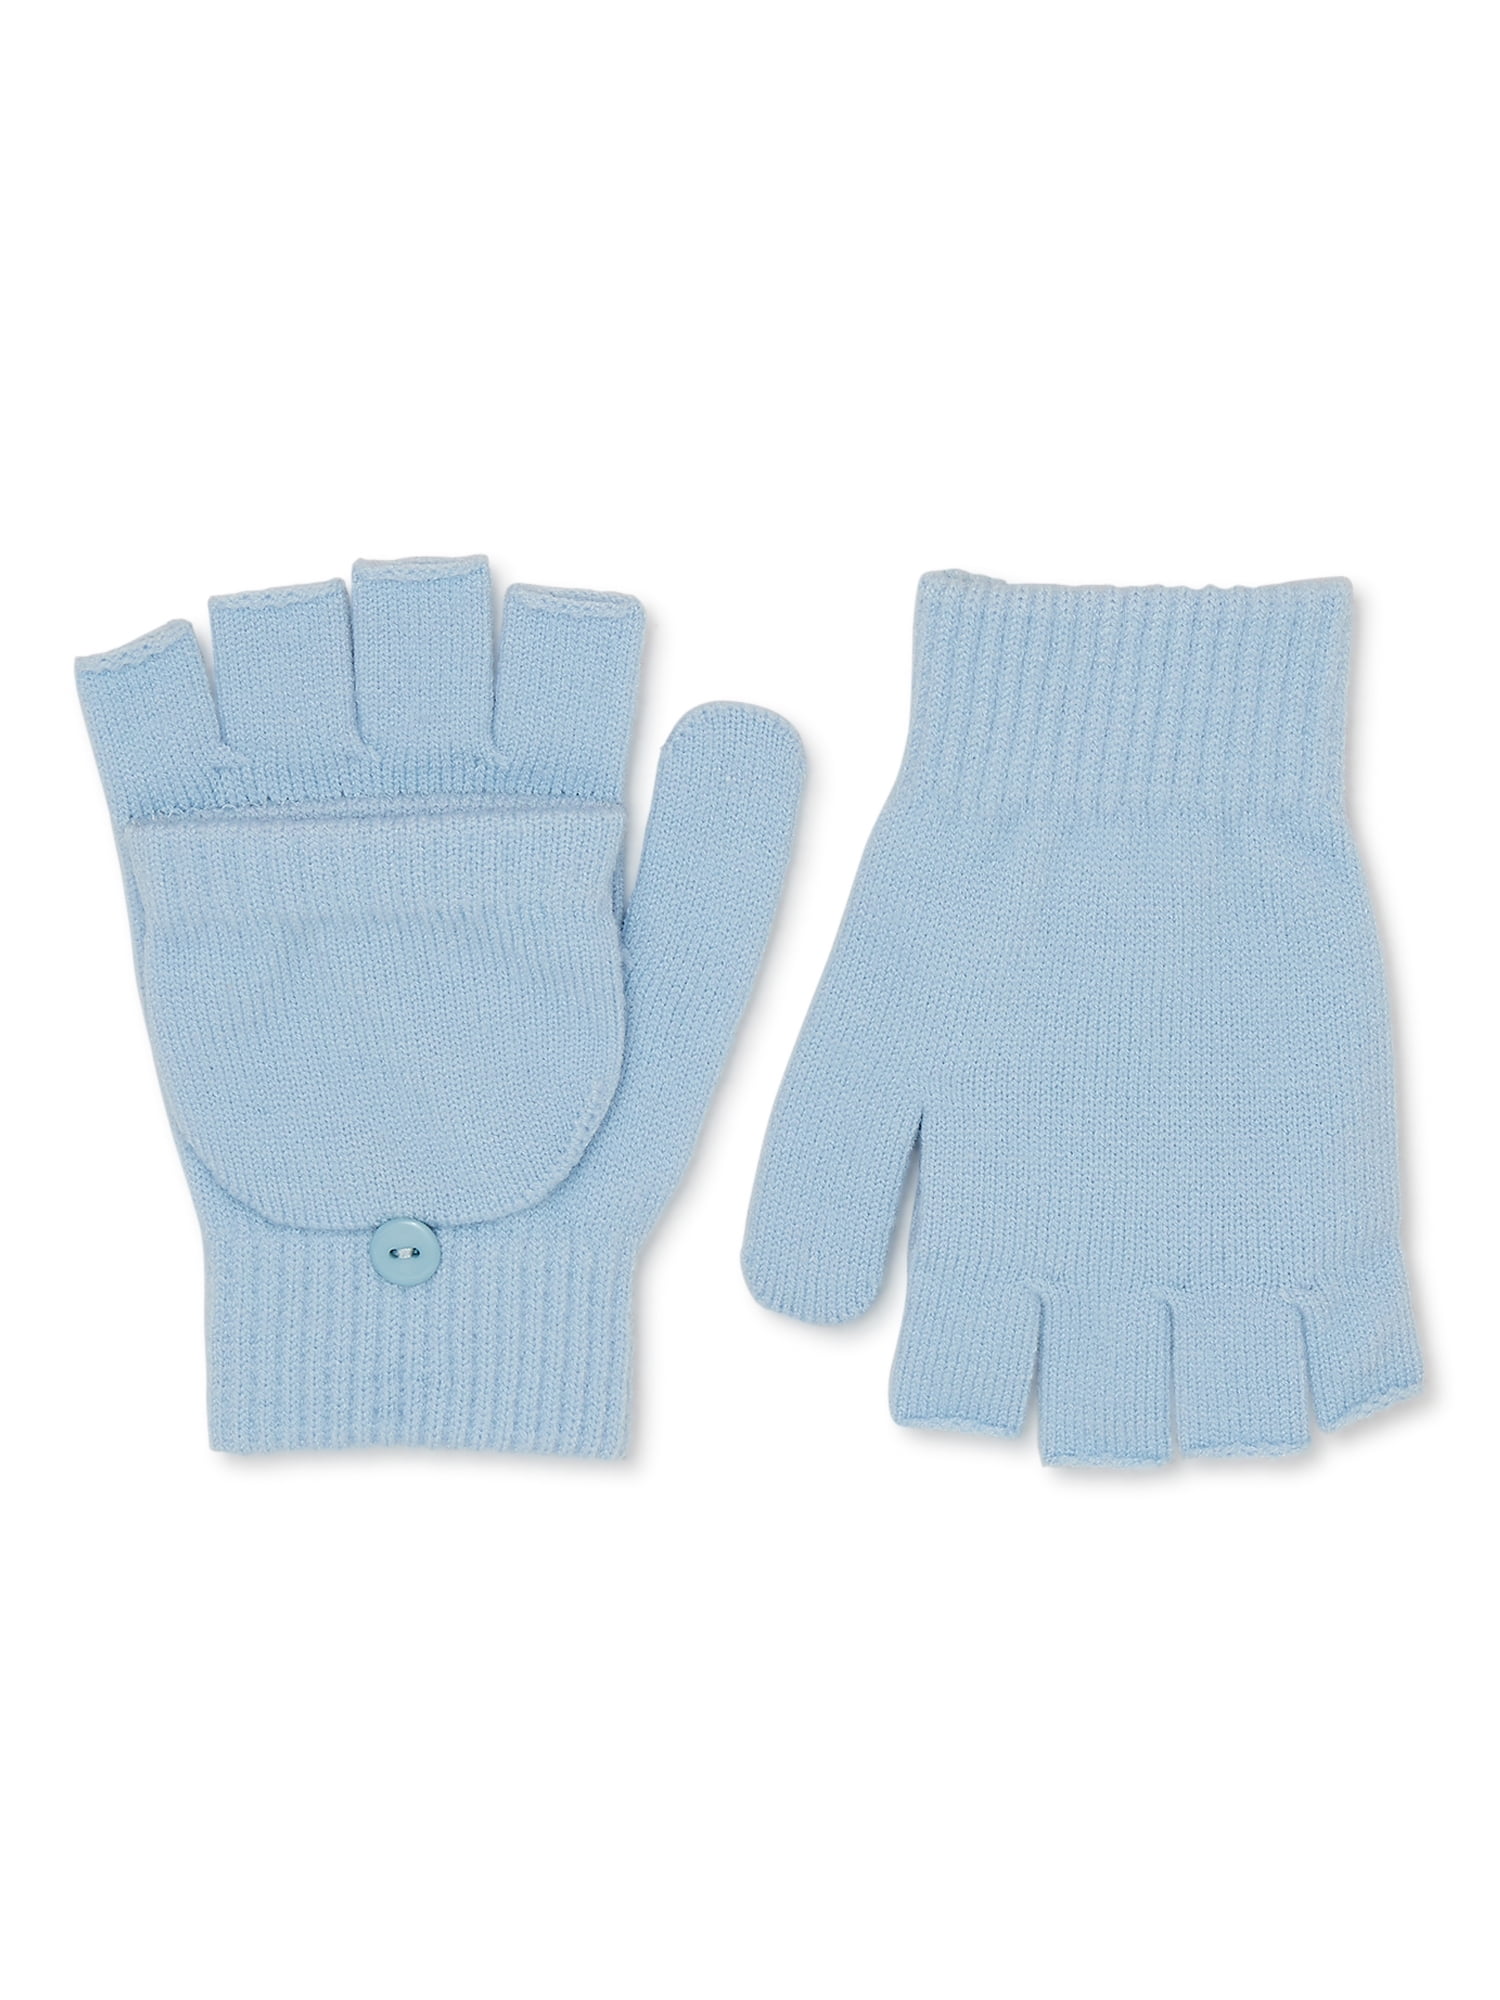 Dropship AMZ Blue Gray Knit Gloves 10 L Size. Pack Of 480 Work Cotton  Gloves For